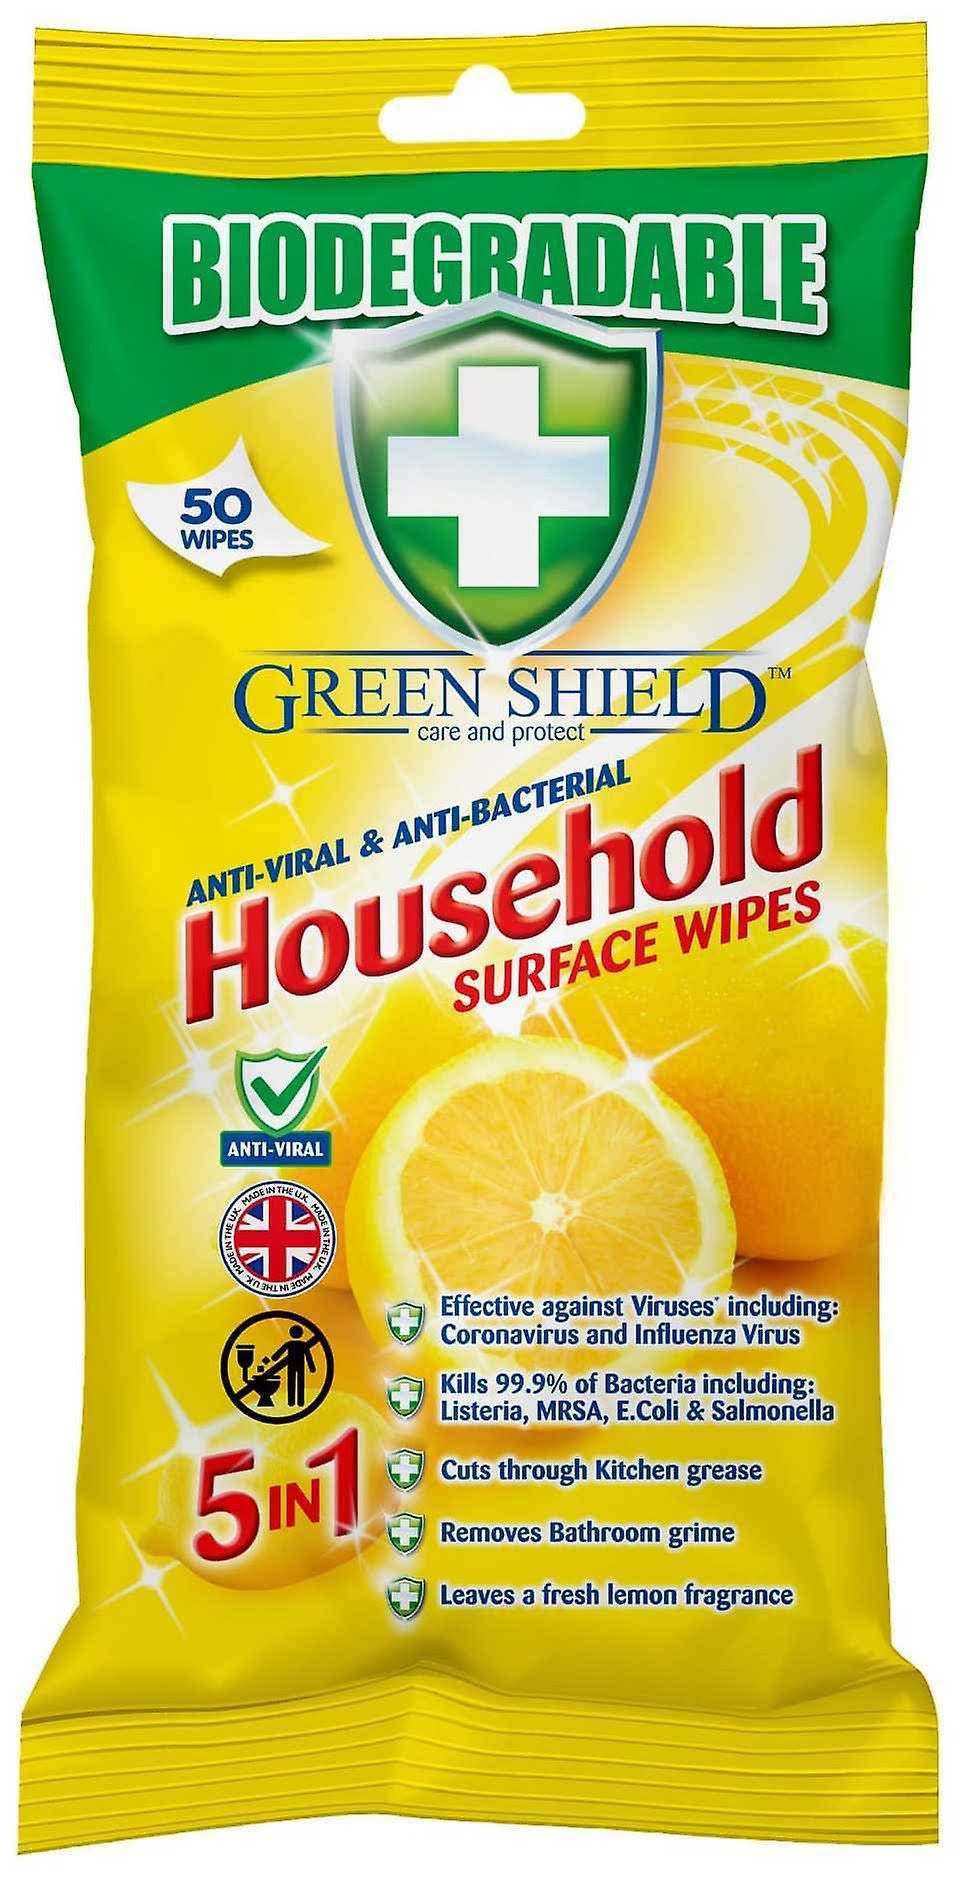 Green Shield Anti-Viral Anti-Bac Household Surface Wipes Pack of 50 Wipes